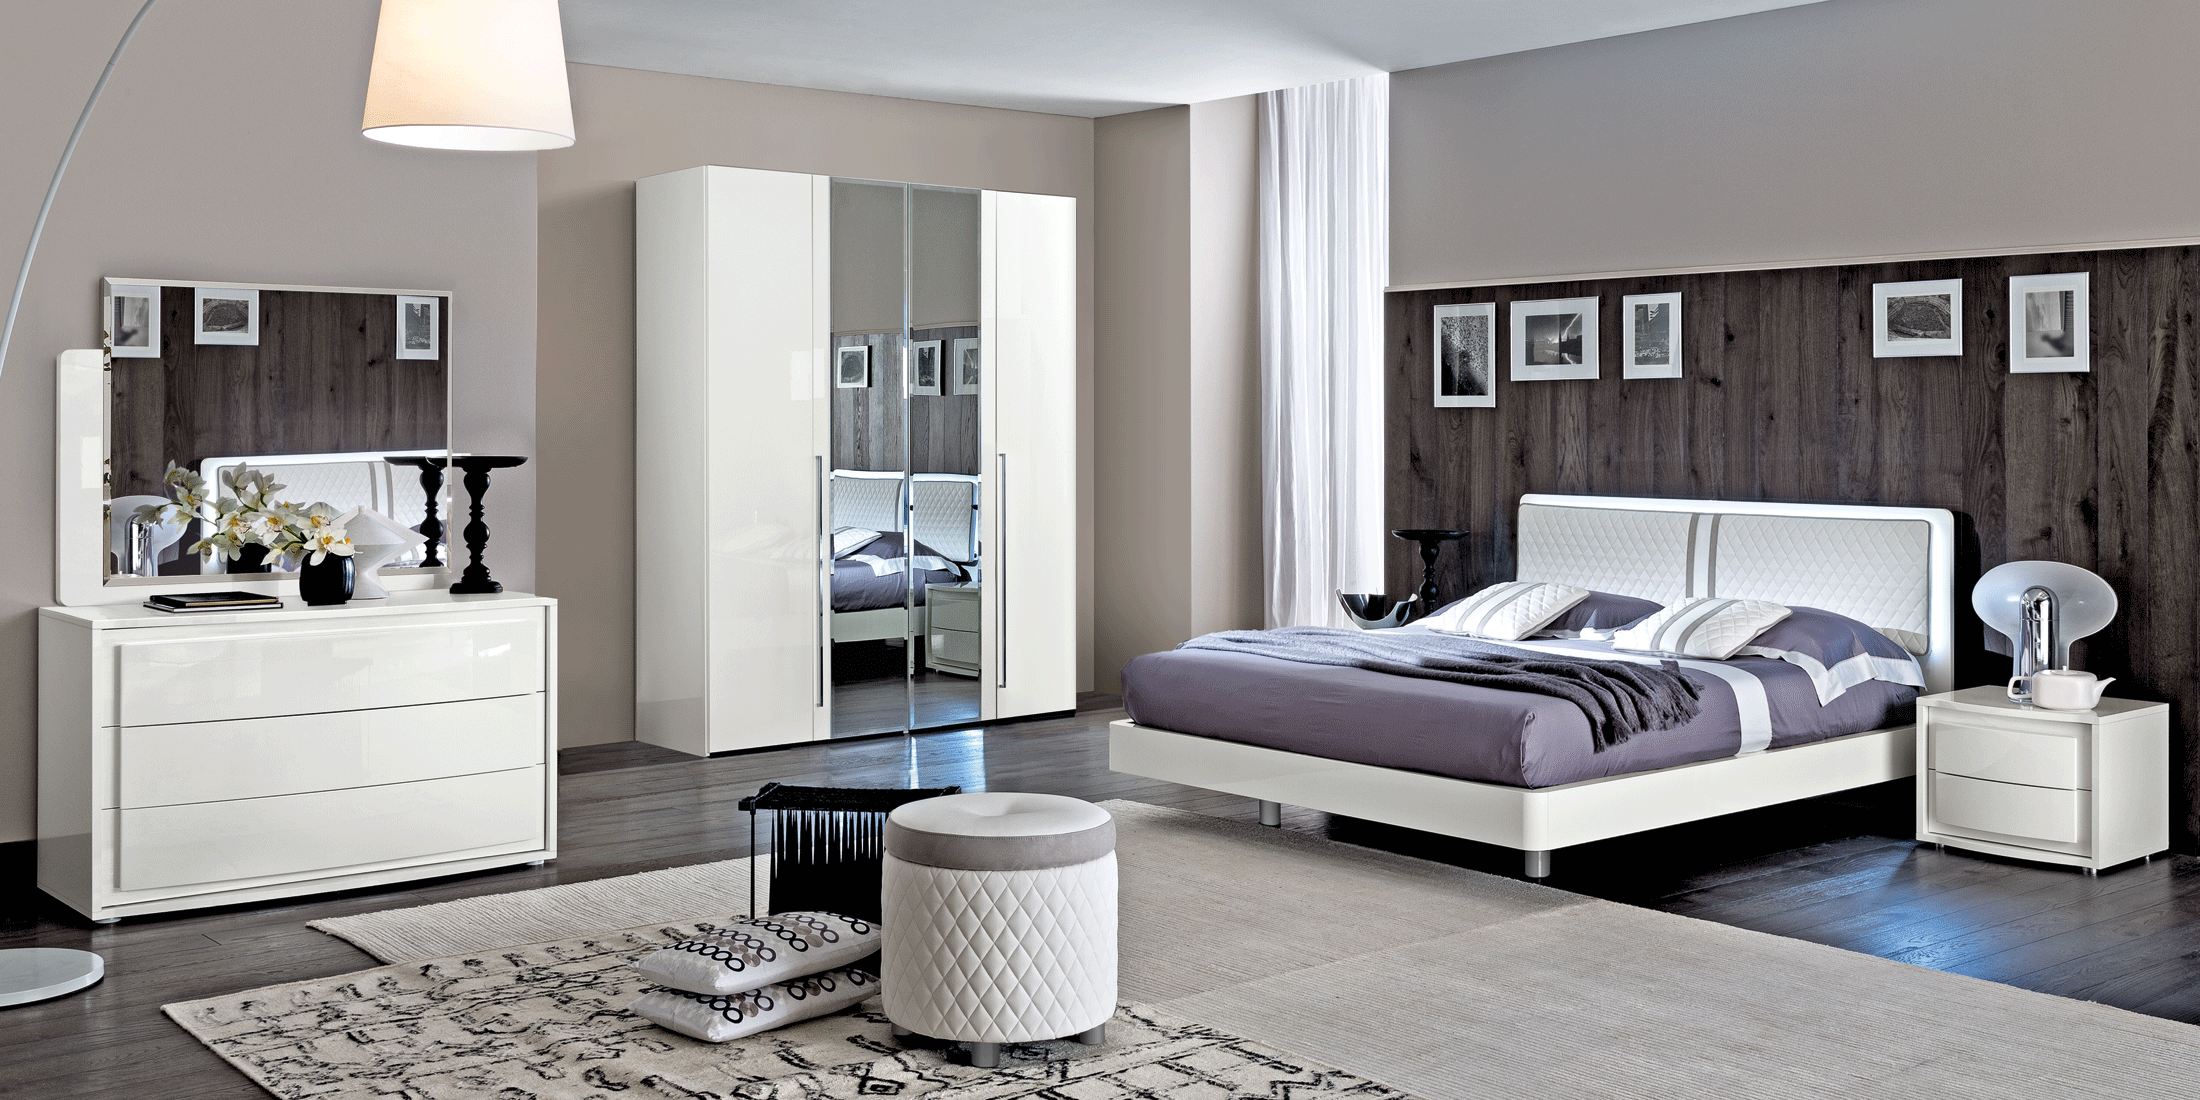 Bedroom Furniture Classic Bedrooms QS and KS Dama Bianca Night - Additional Items